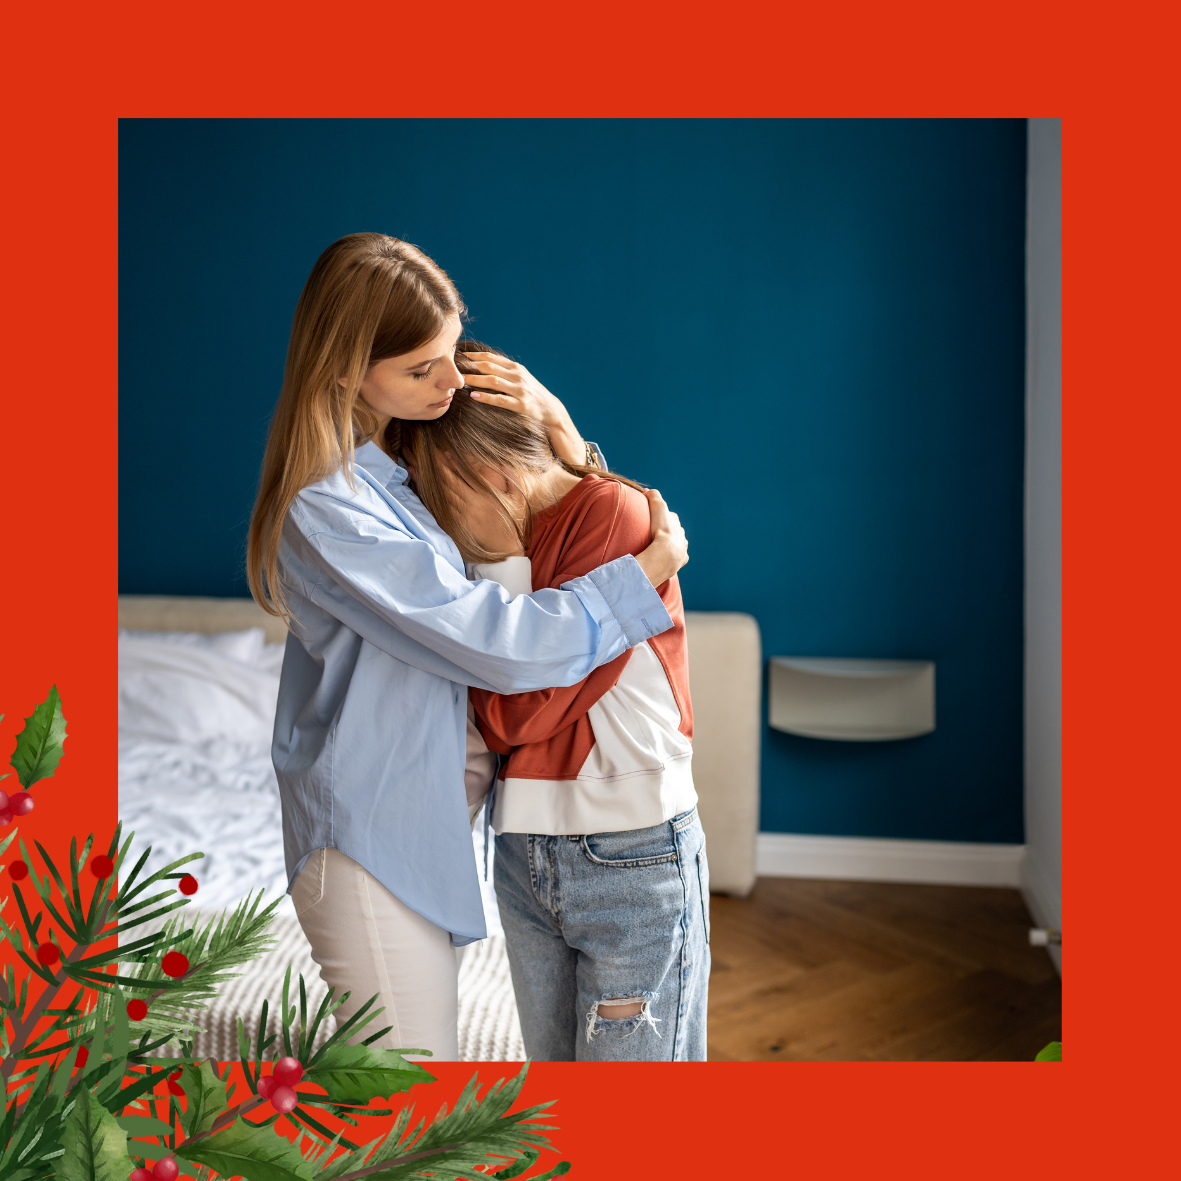 An image of a woman hugging a child who has their head in their hands and is covering their face. The image is on a red background and has holly and berries in the left-hand corner. 